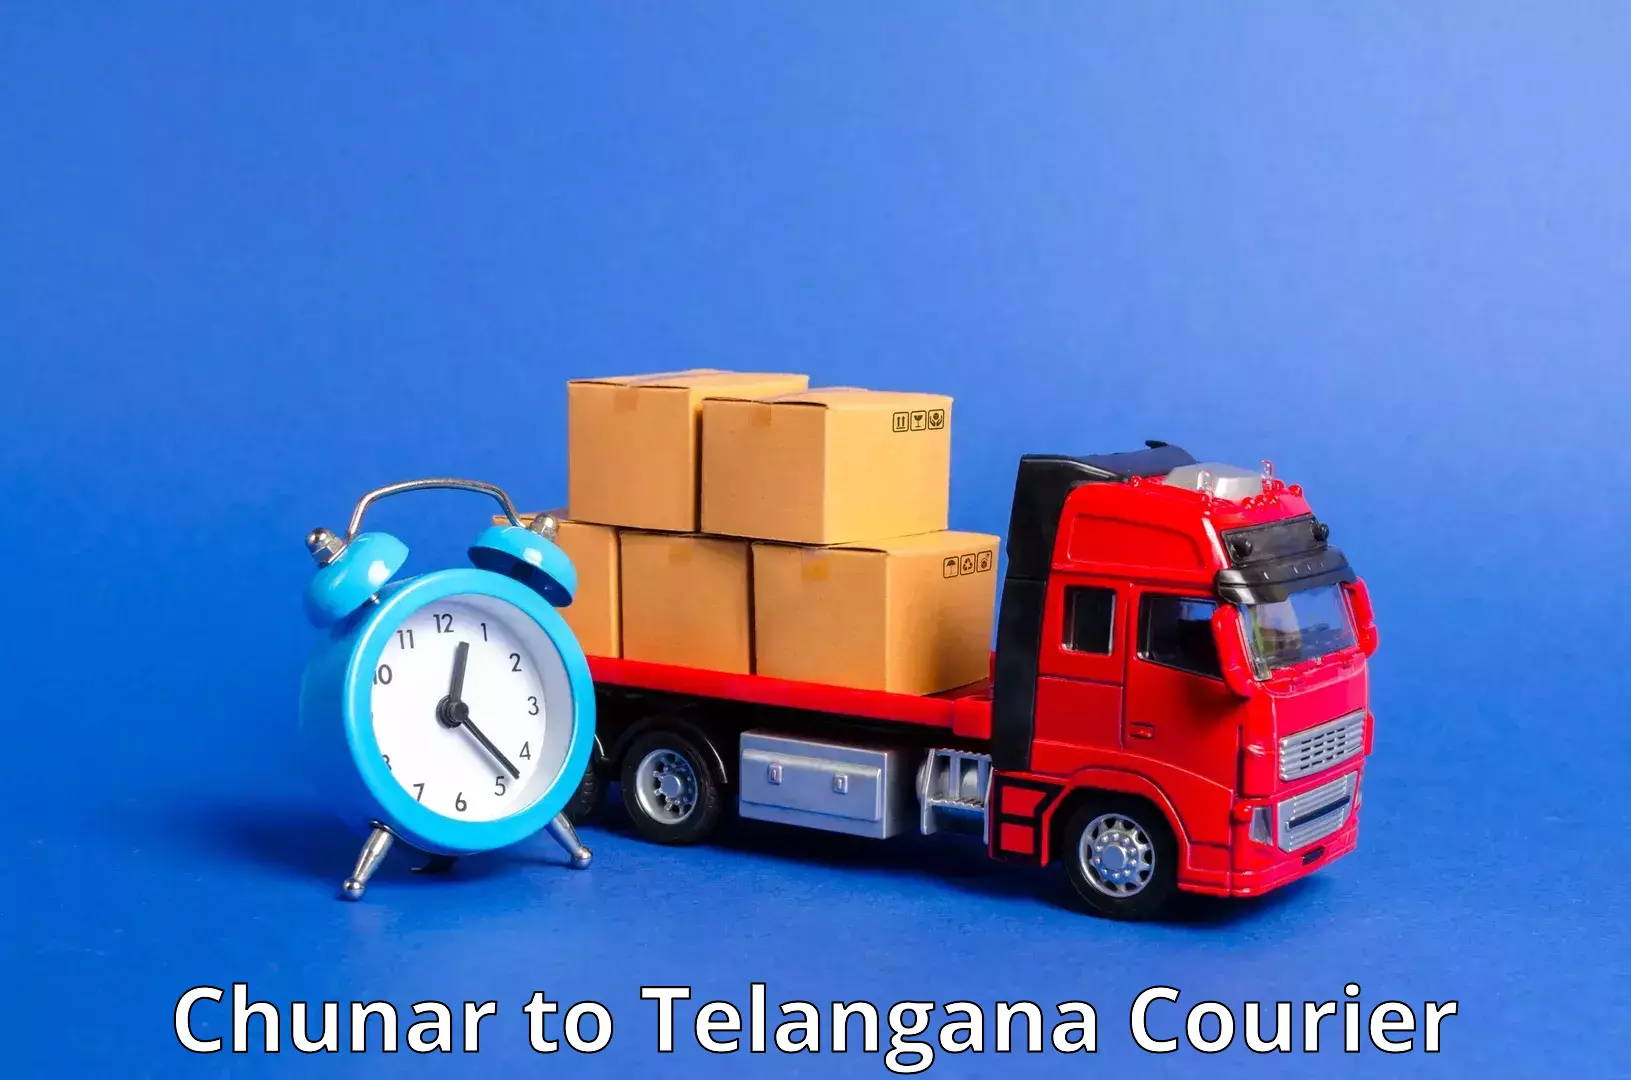 Express delivery capabilities Chunar to Secunderabad